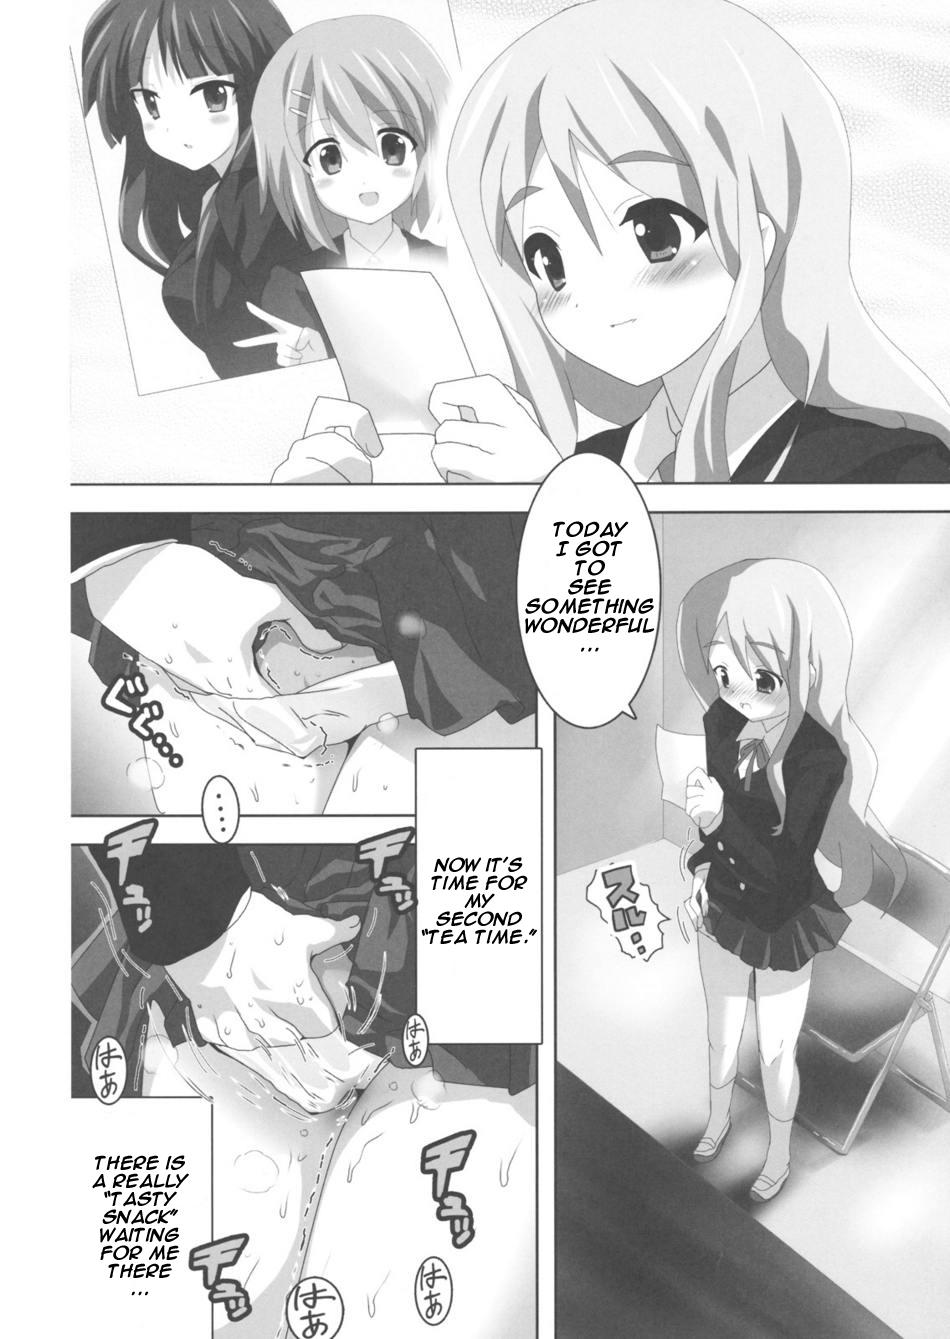 Awesome K-ON Bon?! - K-on Taiwan - Page 10